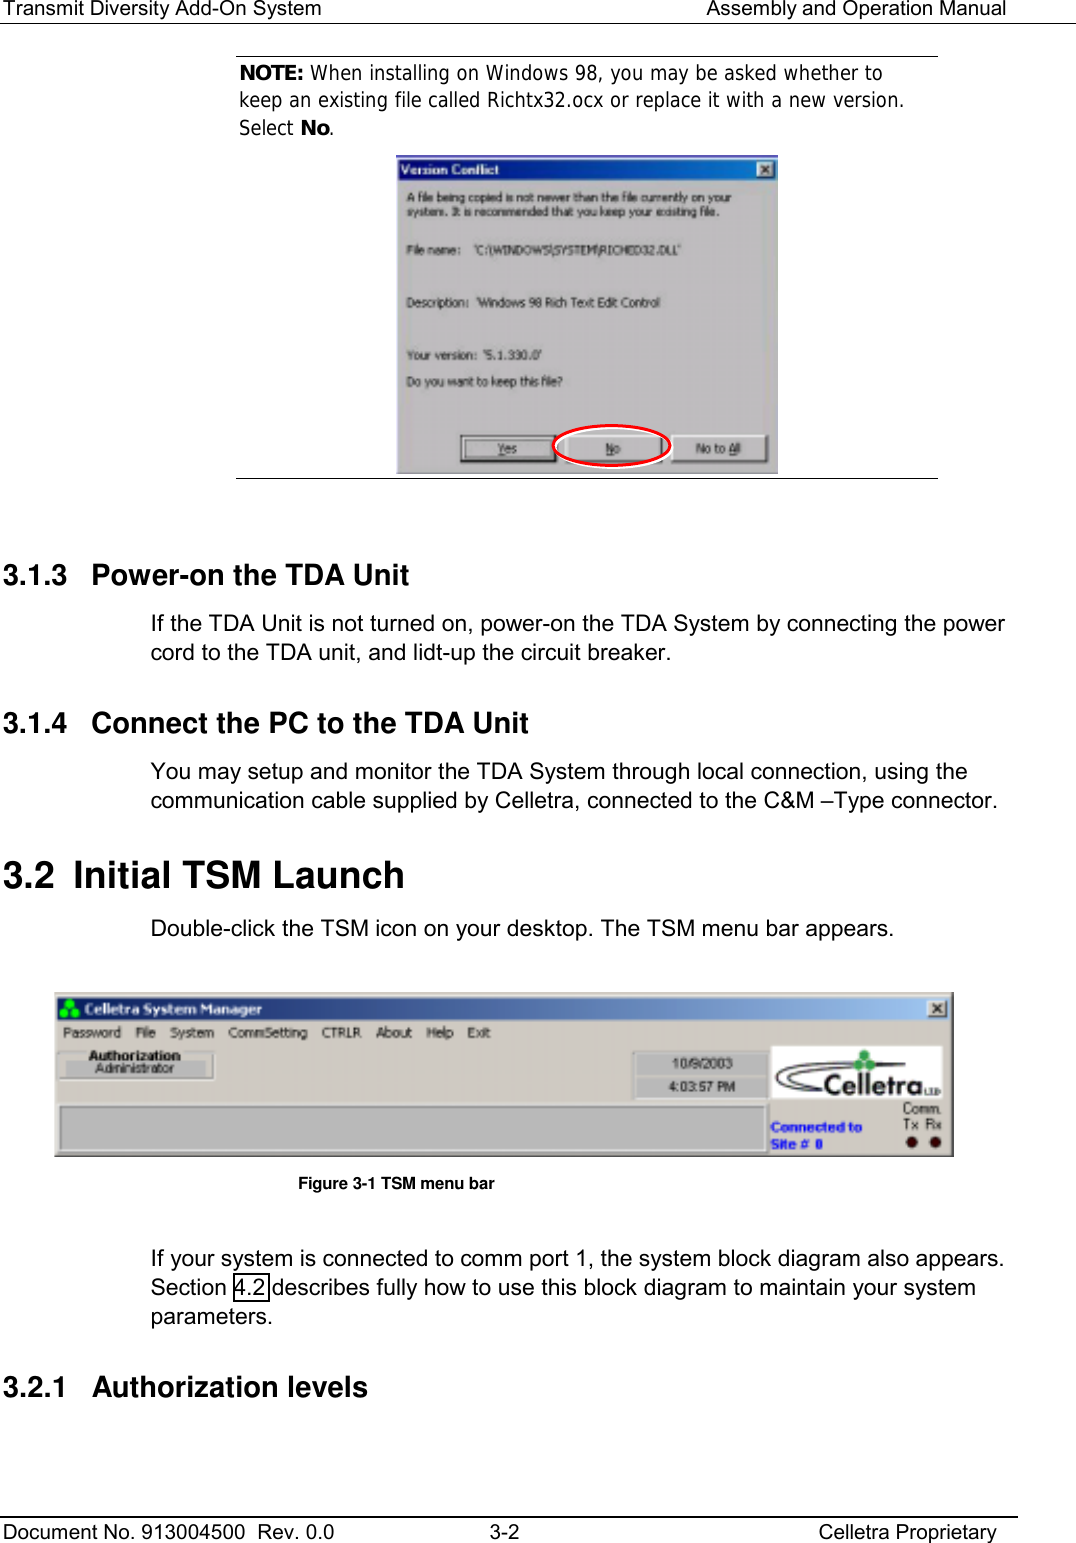 Transmit Diversity Add-On System   Assembly and Operation Manual  Document No. 913004500  Rev. 0.0  3-2  Celletra Proprietary  NOTE: When installing on Windows 98, you may be asked whether to keep an existing file called Richtx32.ocx or replace it with a new version. Select No.    3.1.3  Power-on the TDA Unit If the TDA Unit is not turned on, power-on the TDA System by connecting the power cord to the TDA unit, and lidt-up the circuit breaker. 3.1.4  Connect the PC to the TDA Unit You may setup and monitor the TDA System through local connection, using the communication cable supplied by Celletra, connected to the C&amp;M –Type connector. 3.2  Initial TSM Launch  Double-click the TSM icon on your desktop. The TSM menu bar appears.    Figure  3-1 TSM menu bar  If your system is connected to comm port 1, the system block diagram also appears. Section  4.2 describes fully how to use this block diagram to maintain your system parameters. 3.2.1 Authorization levels  